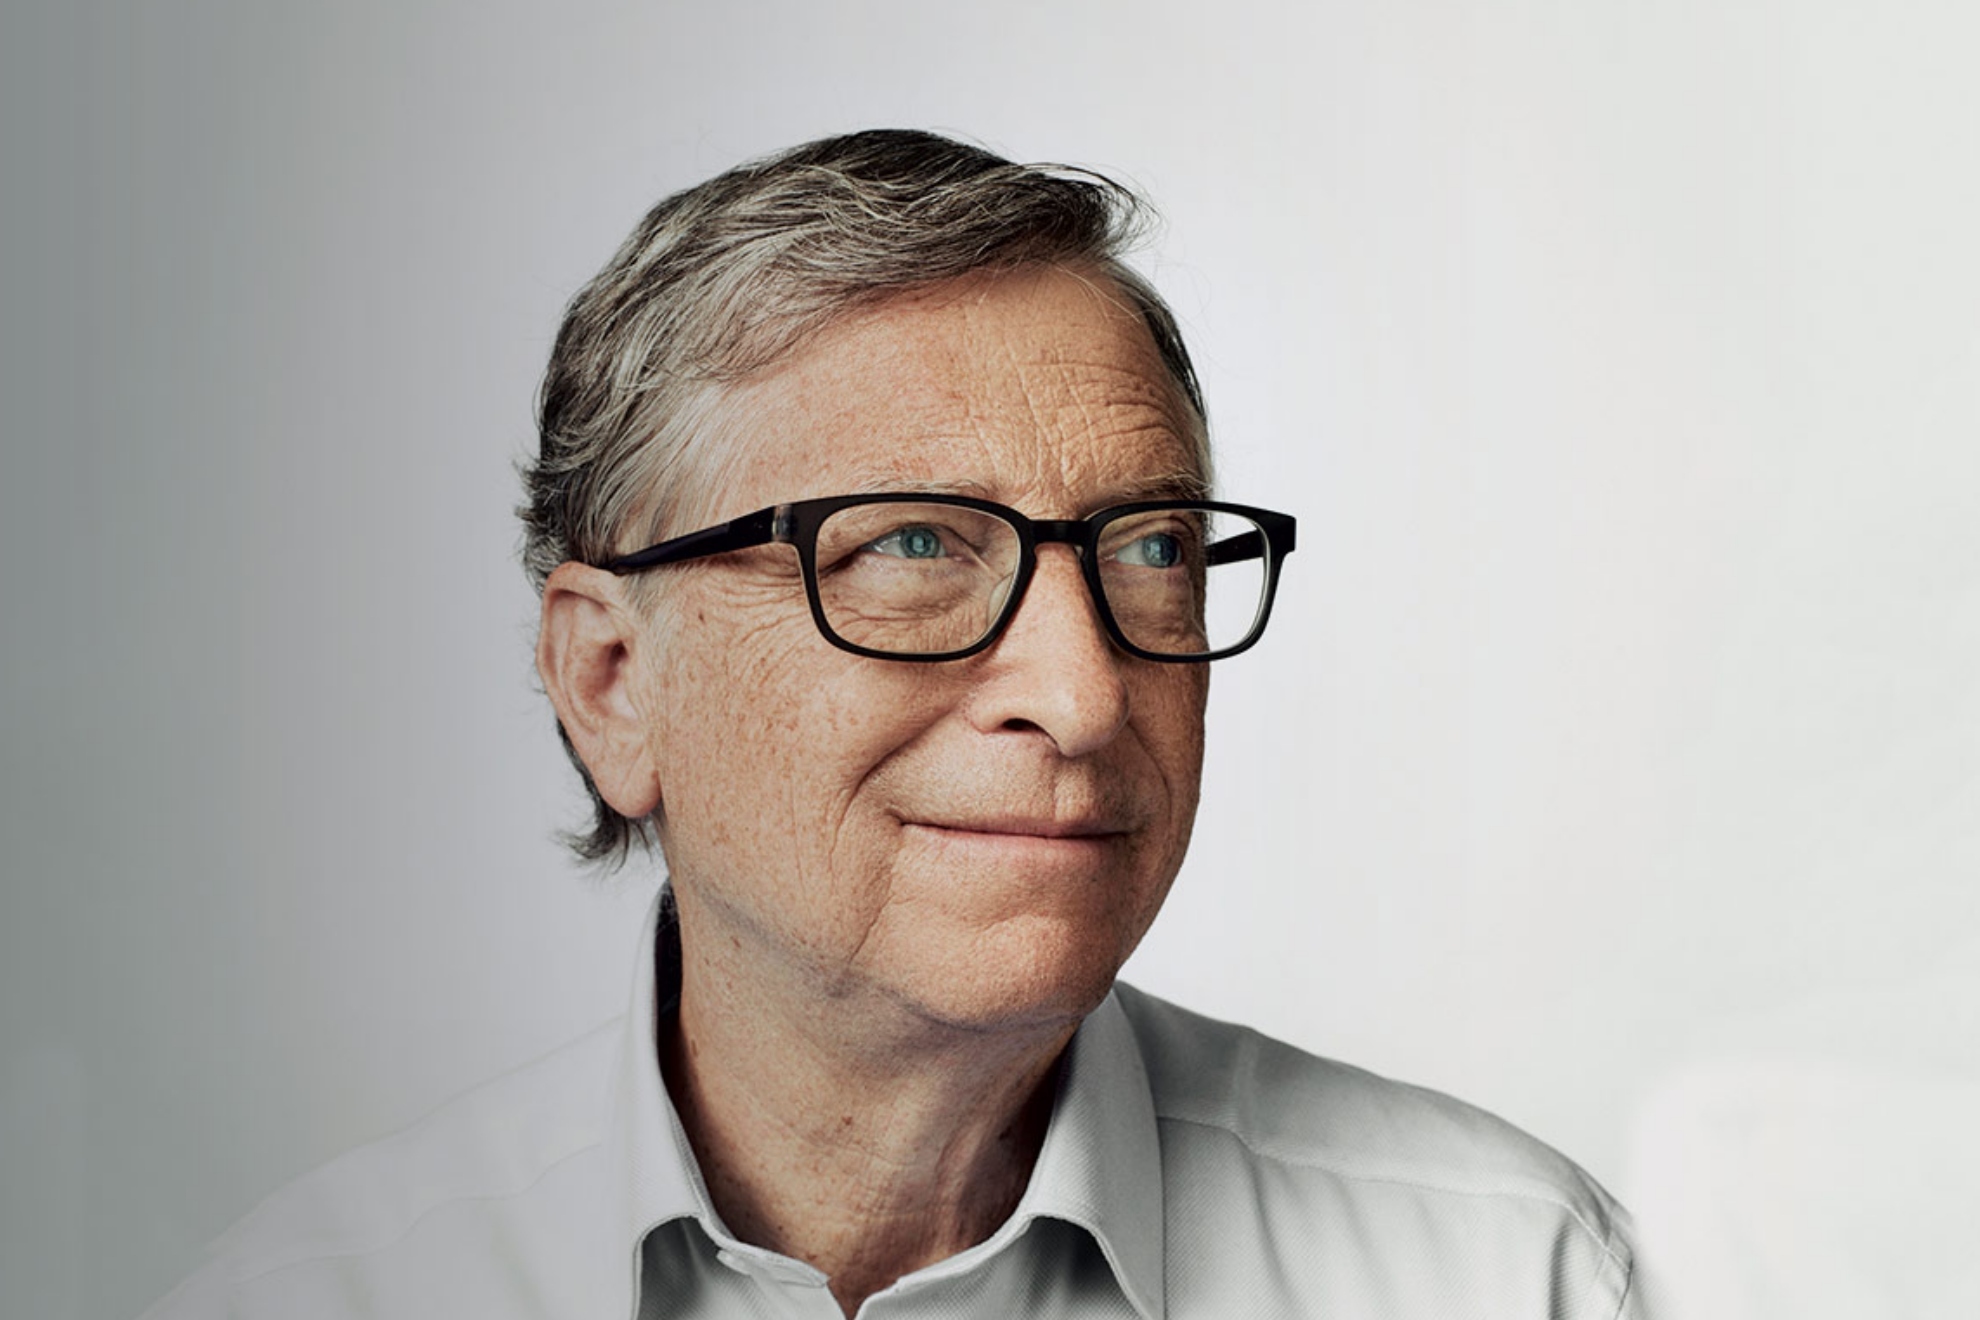 Bill Gates spends millions on a famous beer company